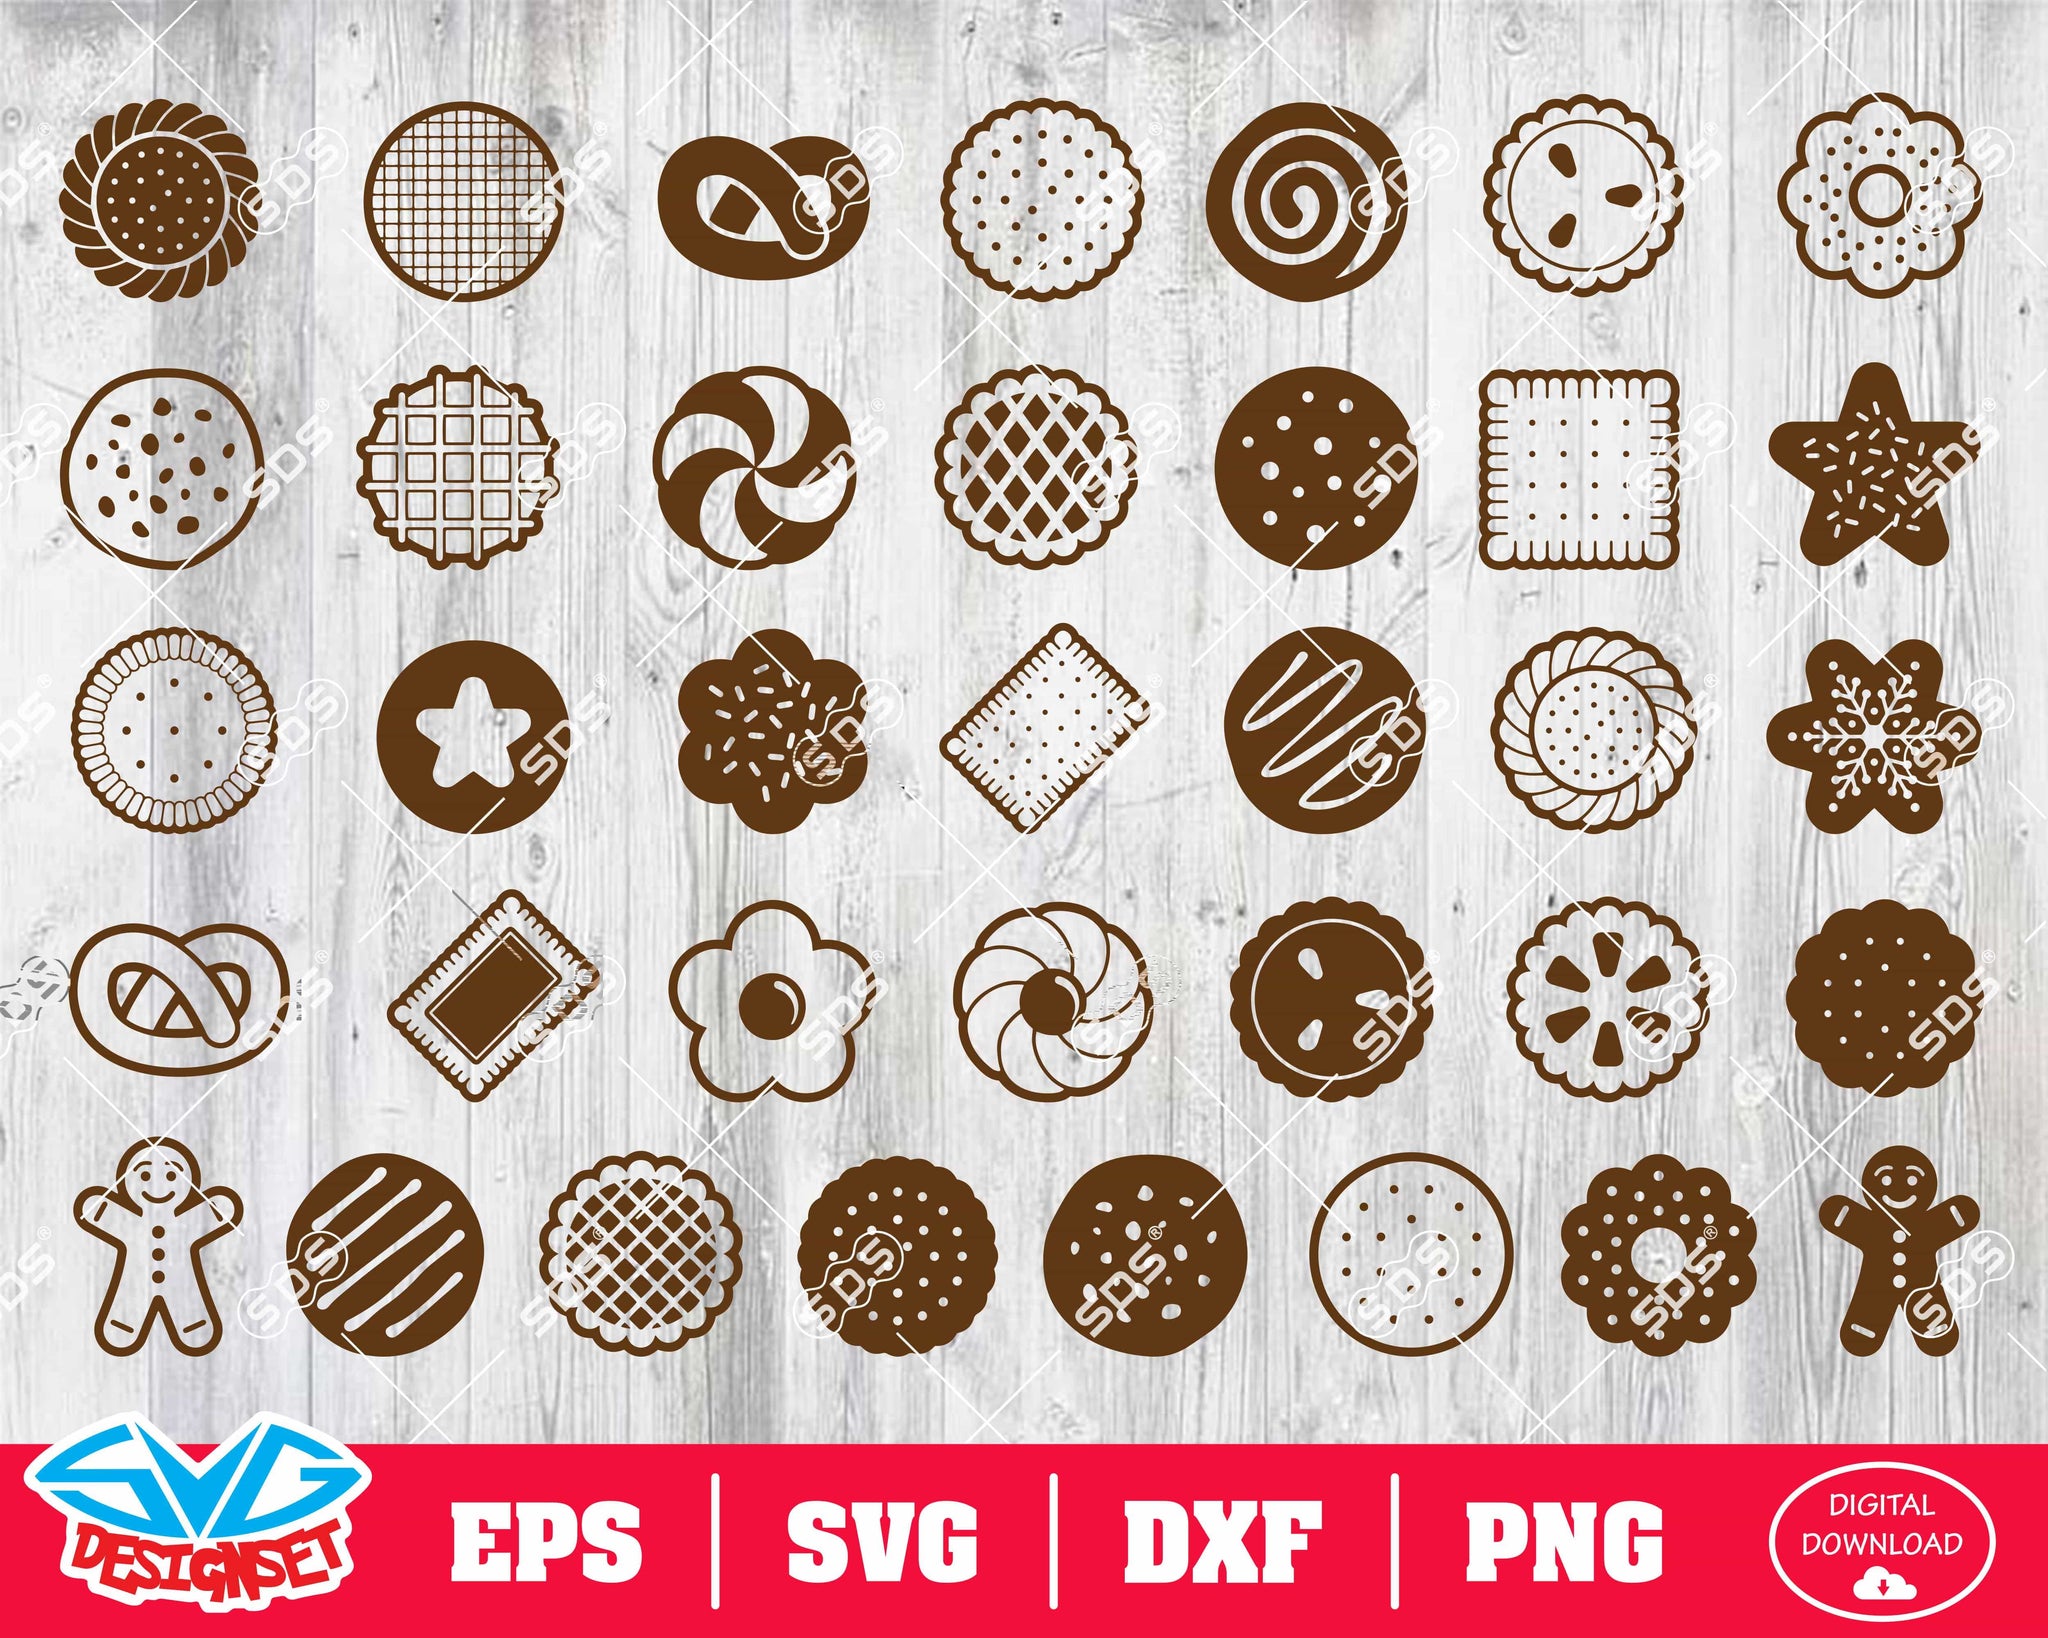 Cookie Svg, Dxf, Eps, Png, Clipart, Silhouette and Cutfiles - SVGDesignSets